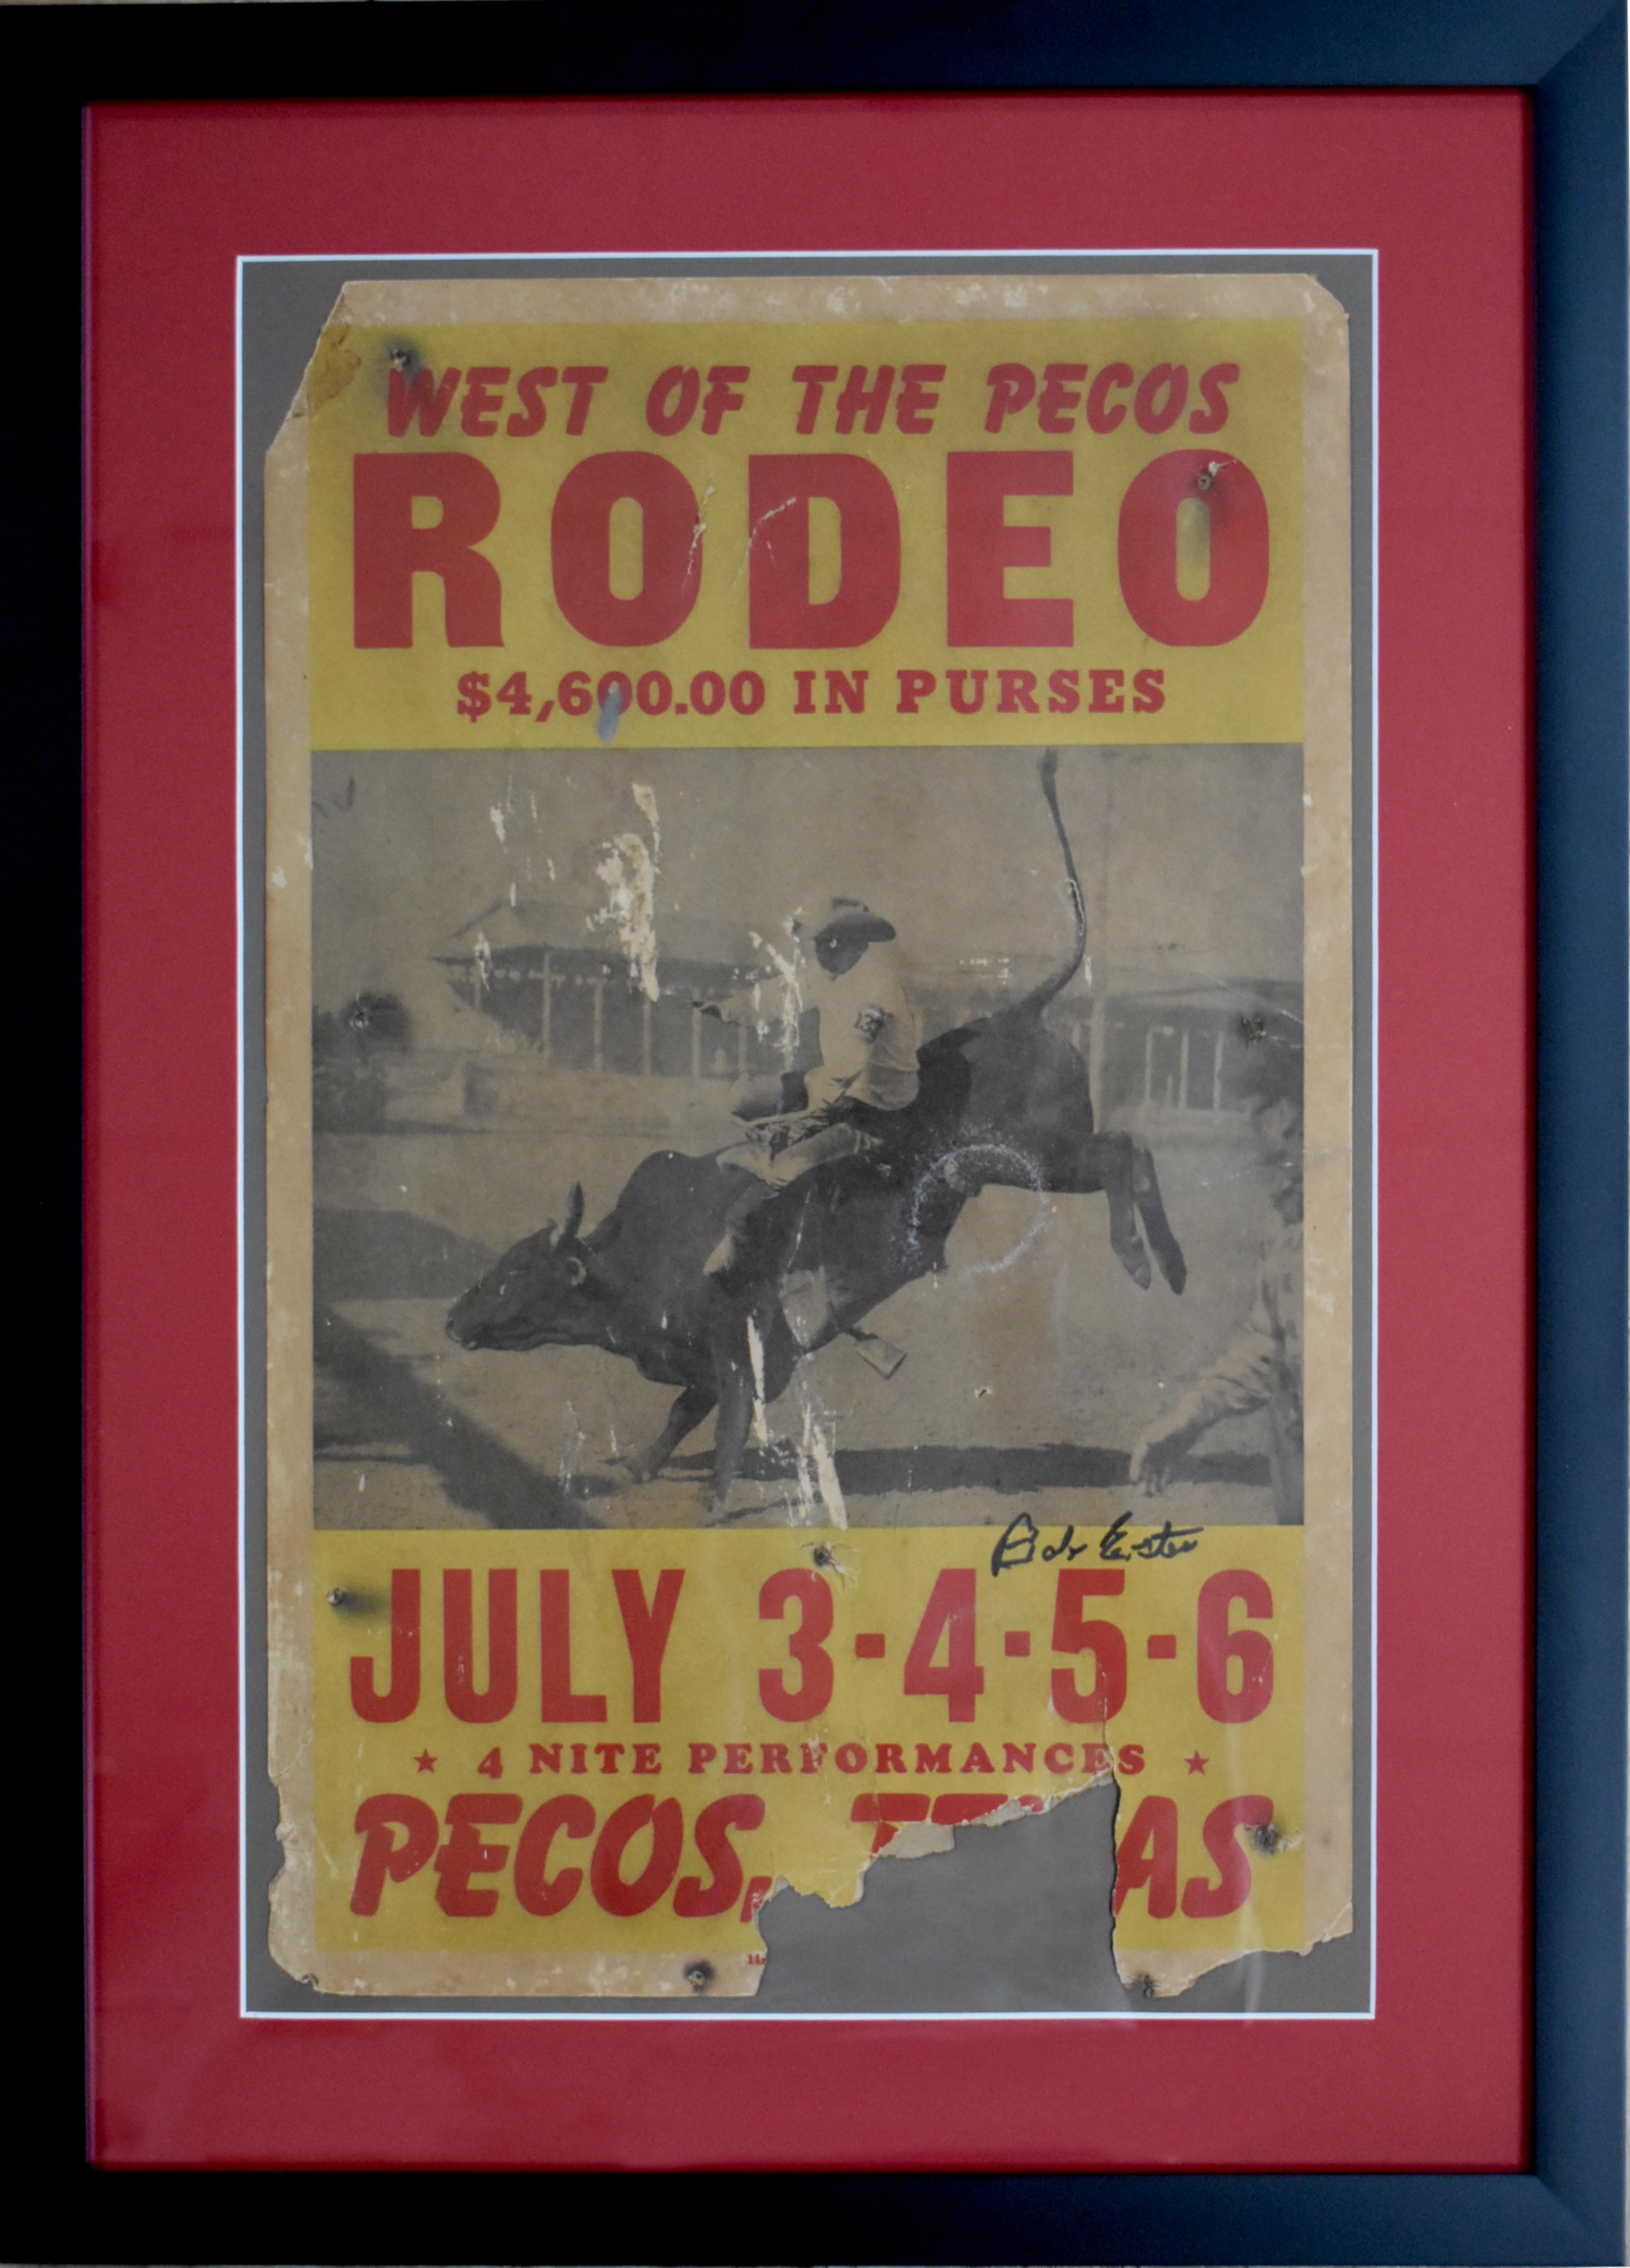 RODEO POSTER Print - "WEST OF THE PECOS RODEO" AUTOGRAPHED LATER BY BOB ESTES